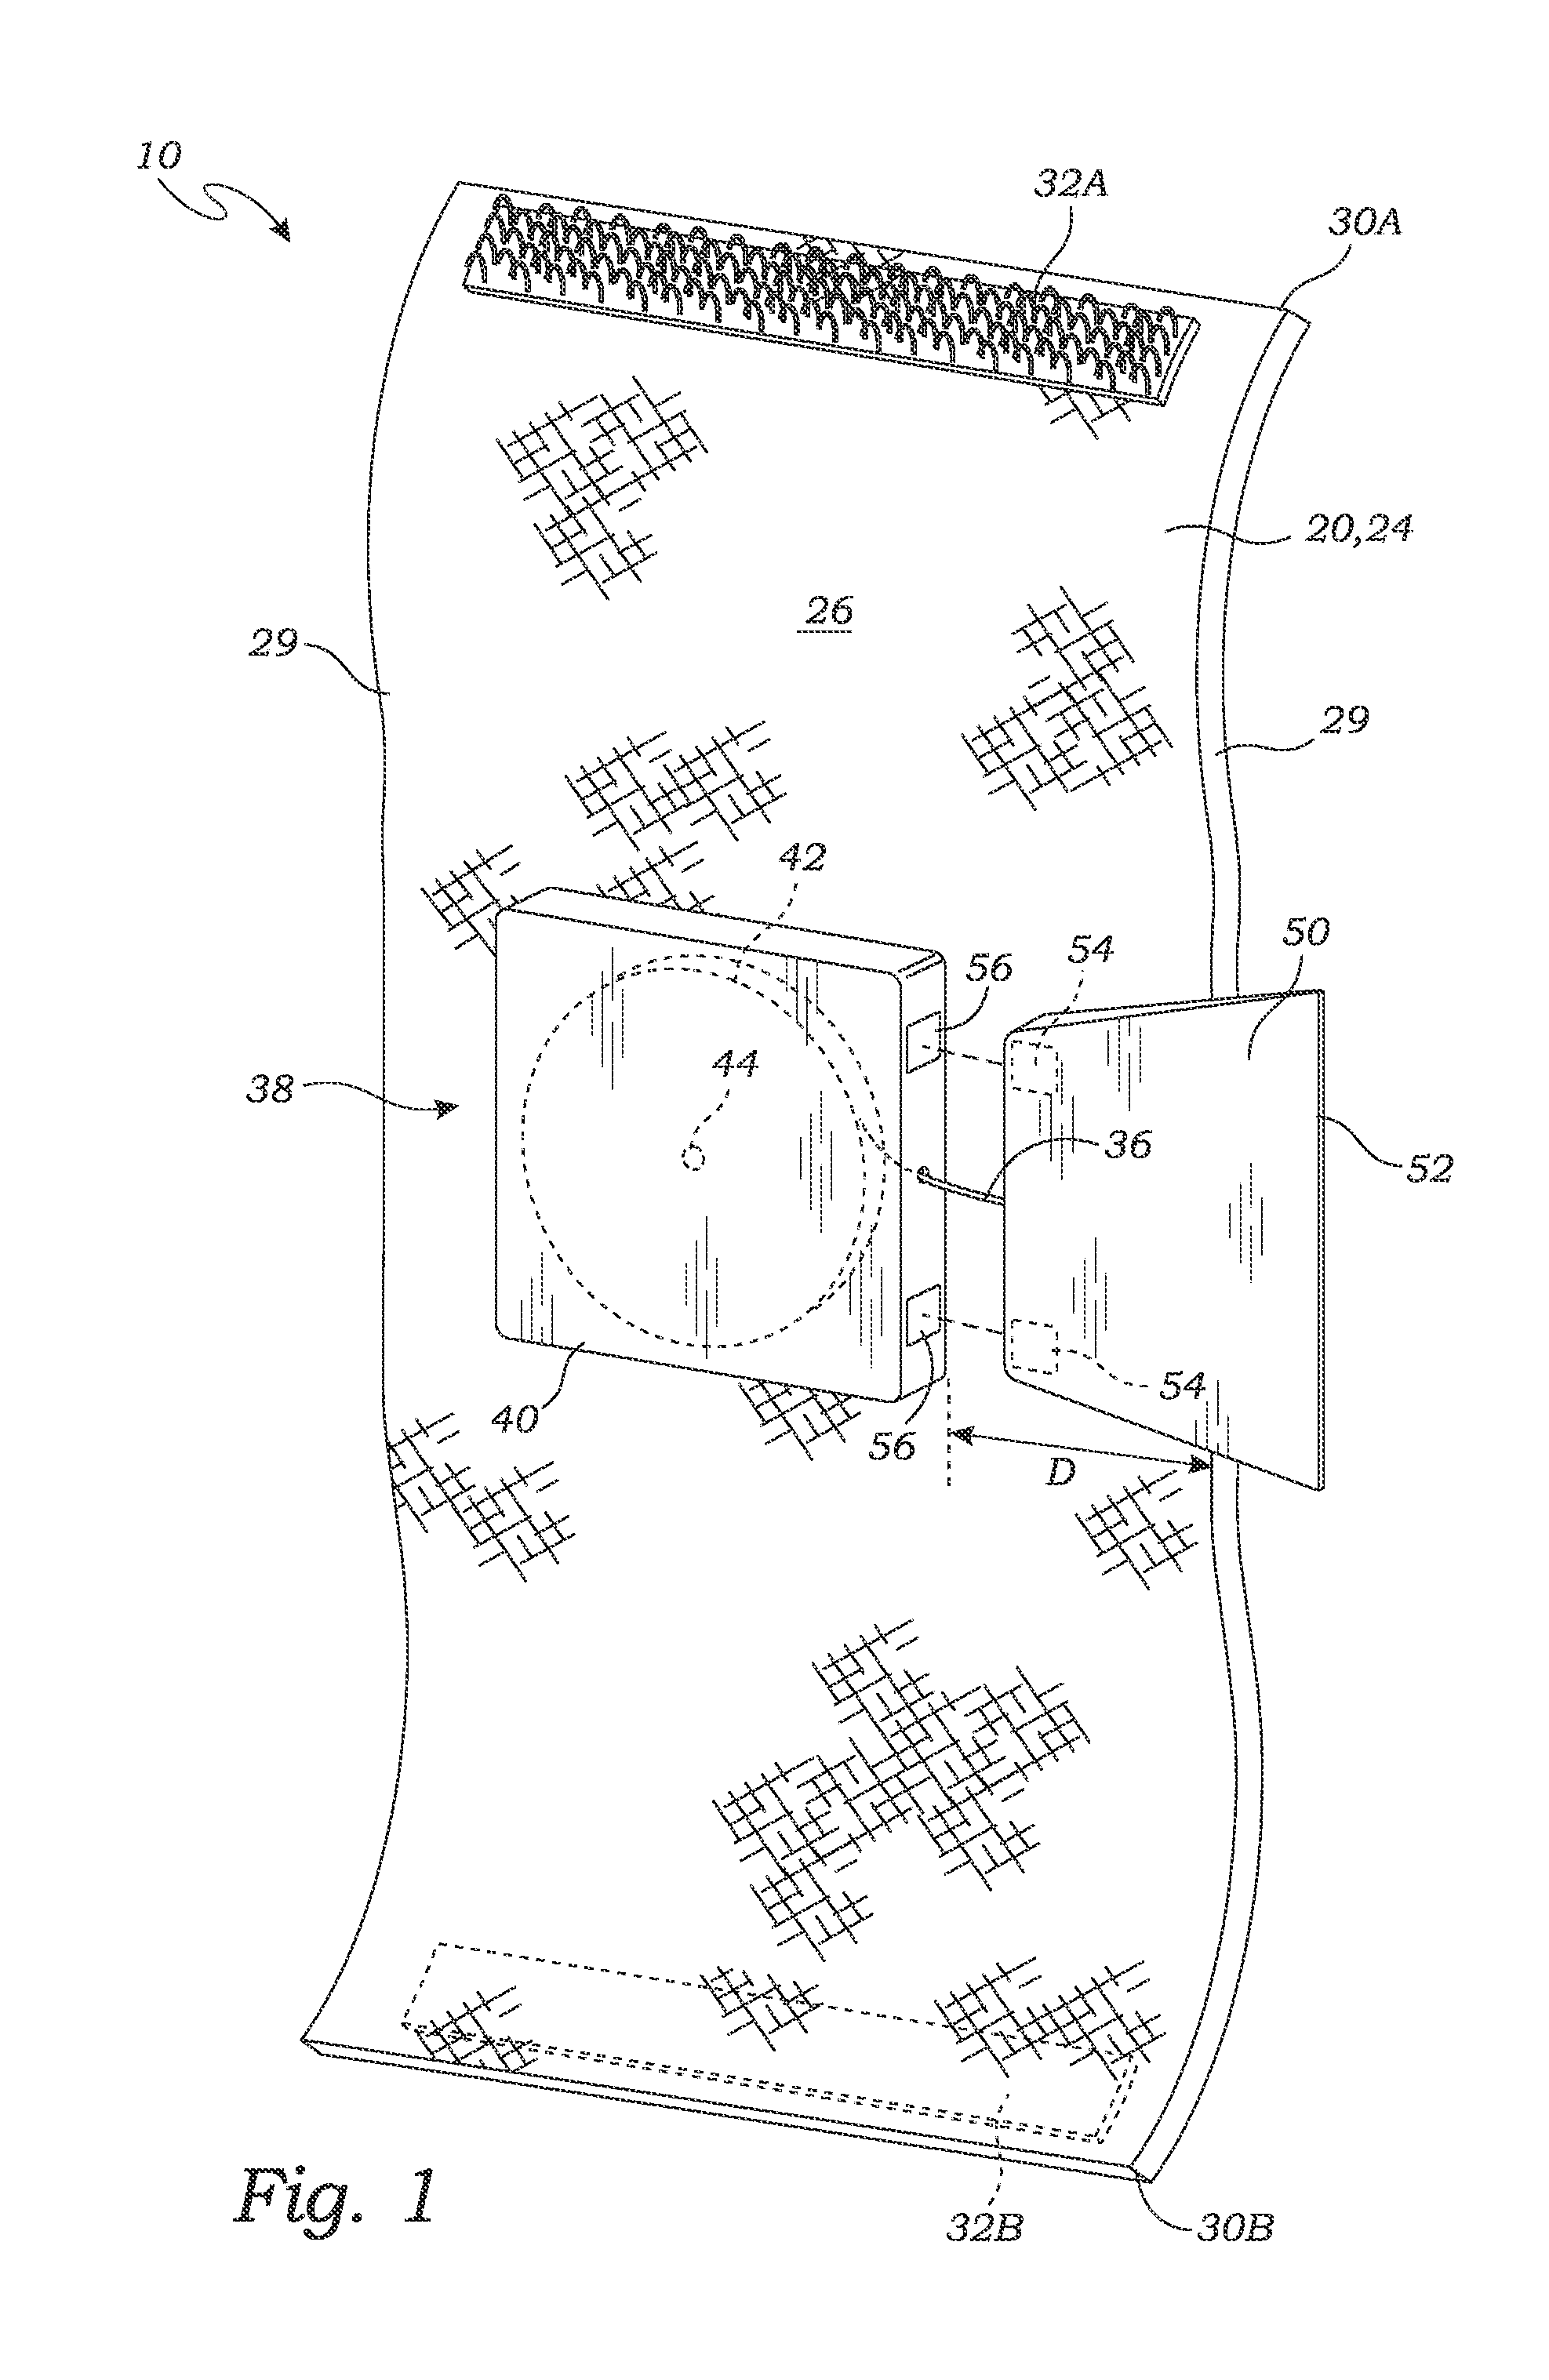 Eyewear cleaning device and method of use